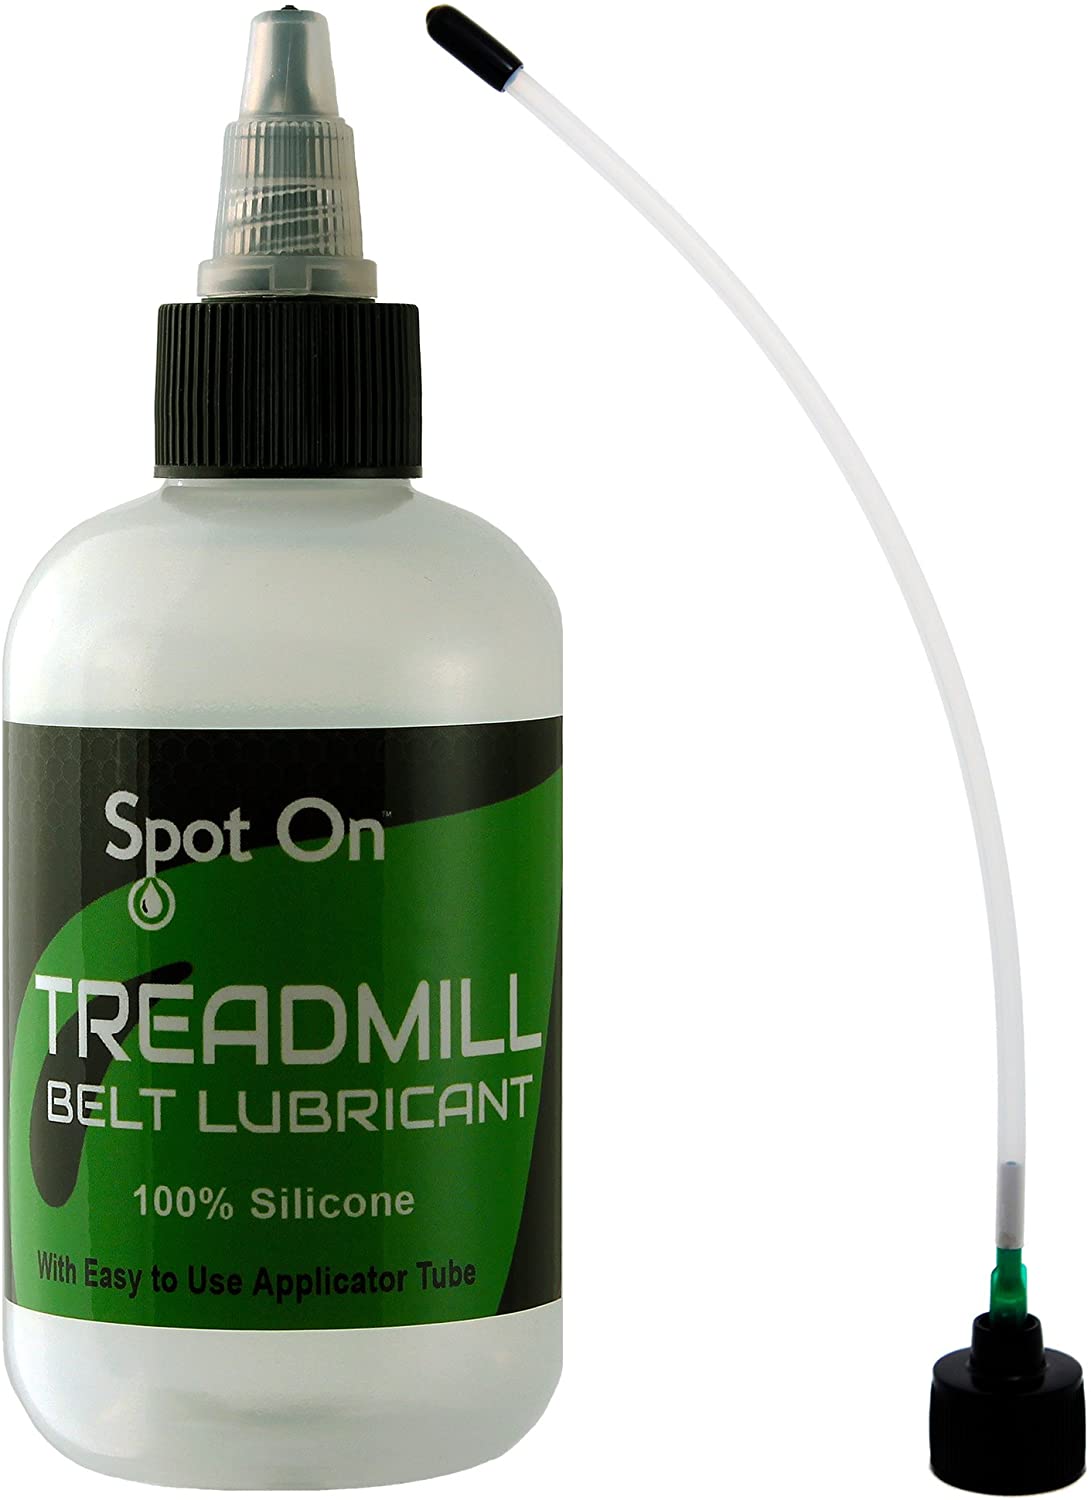 Spot On silicone belt lubricant treadmills - top 10 treadmill lubricants - lubricants review